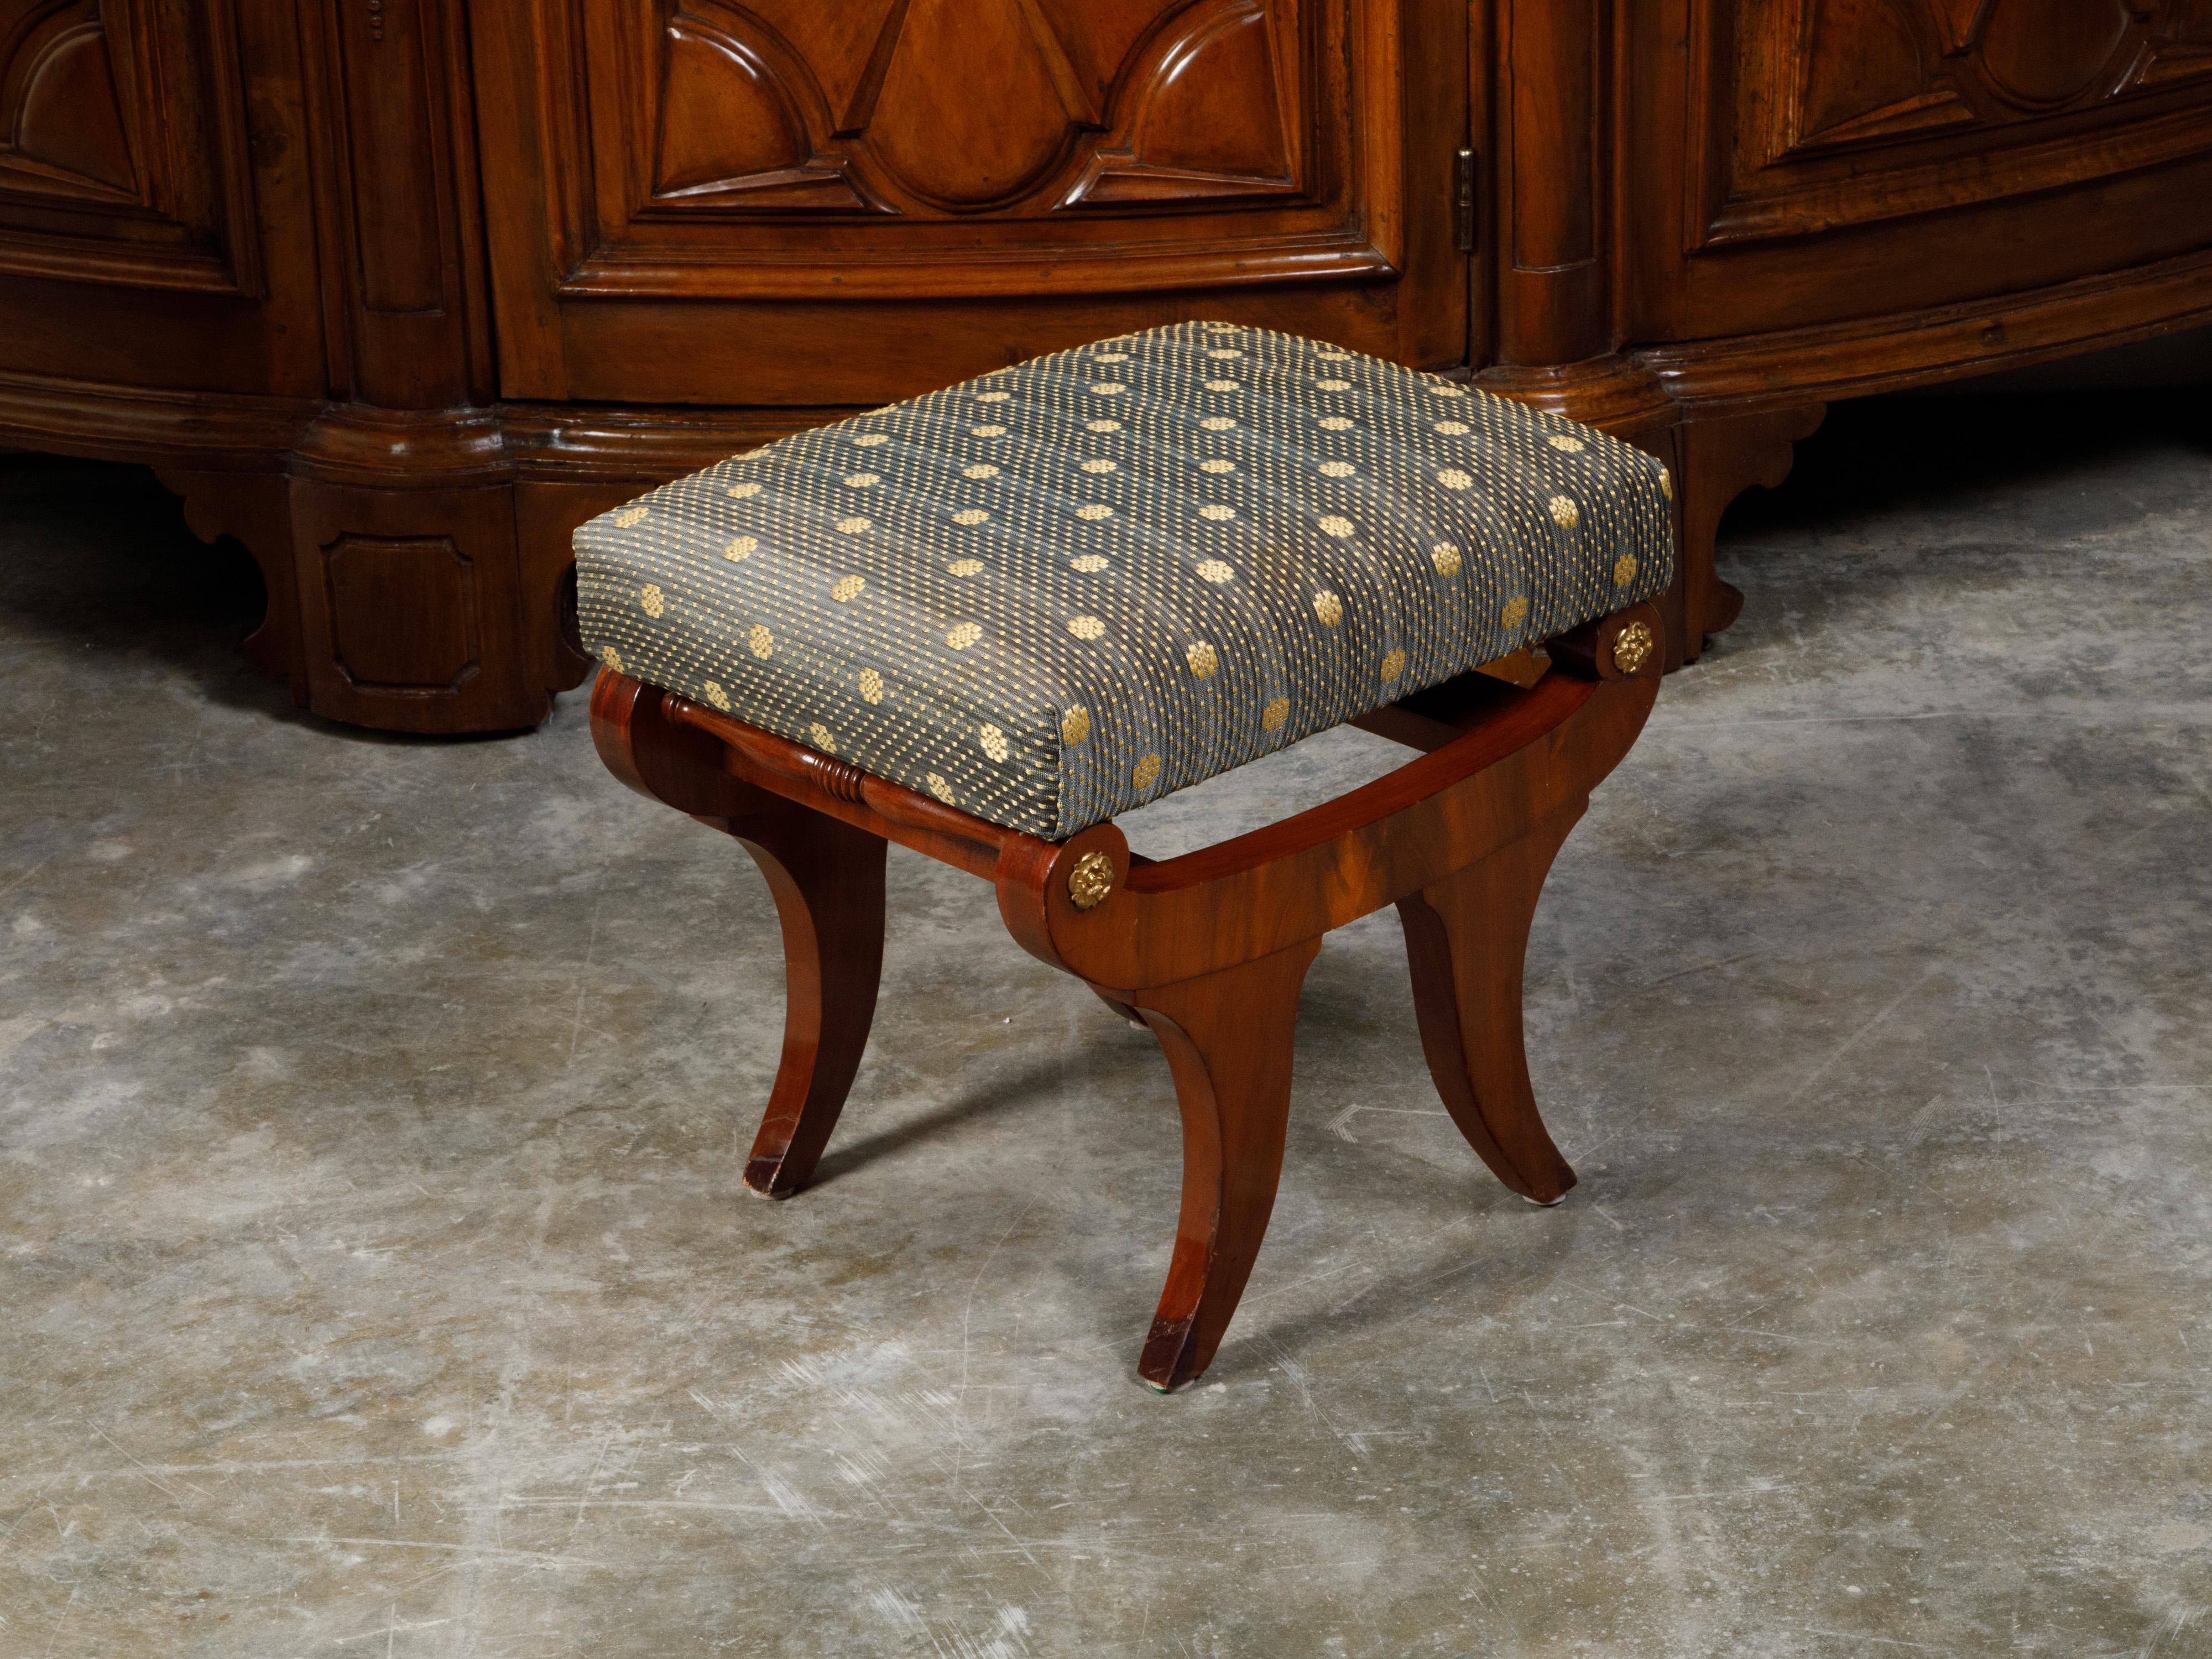 Biedermeier Period 19th Century Walnut Stool with Gilt Rosettes and Upholstery For Sale 2